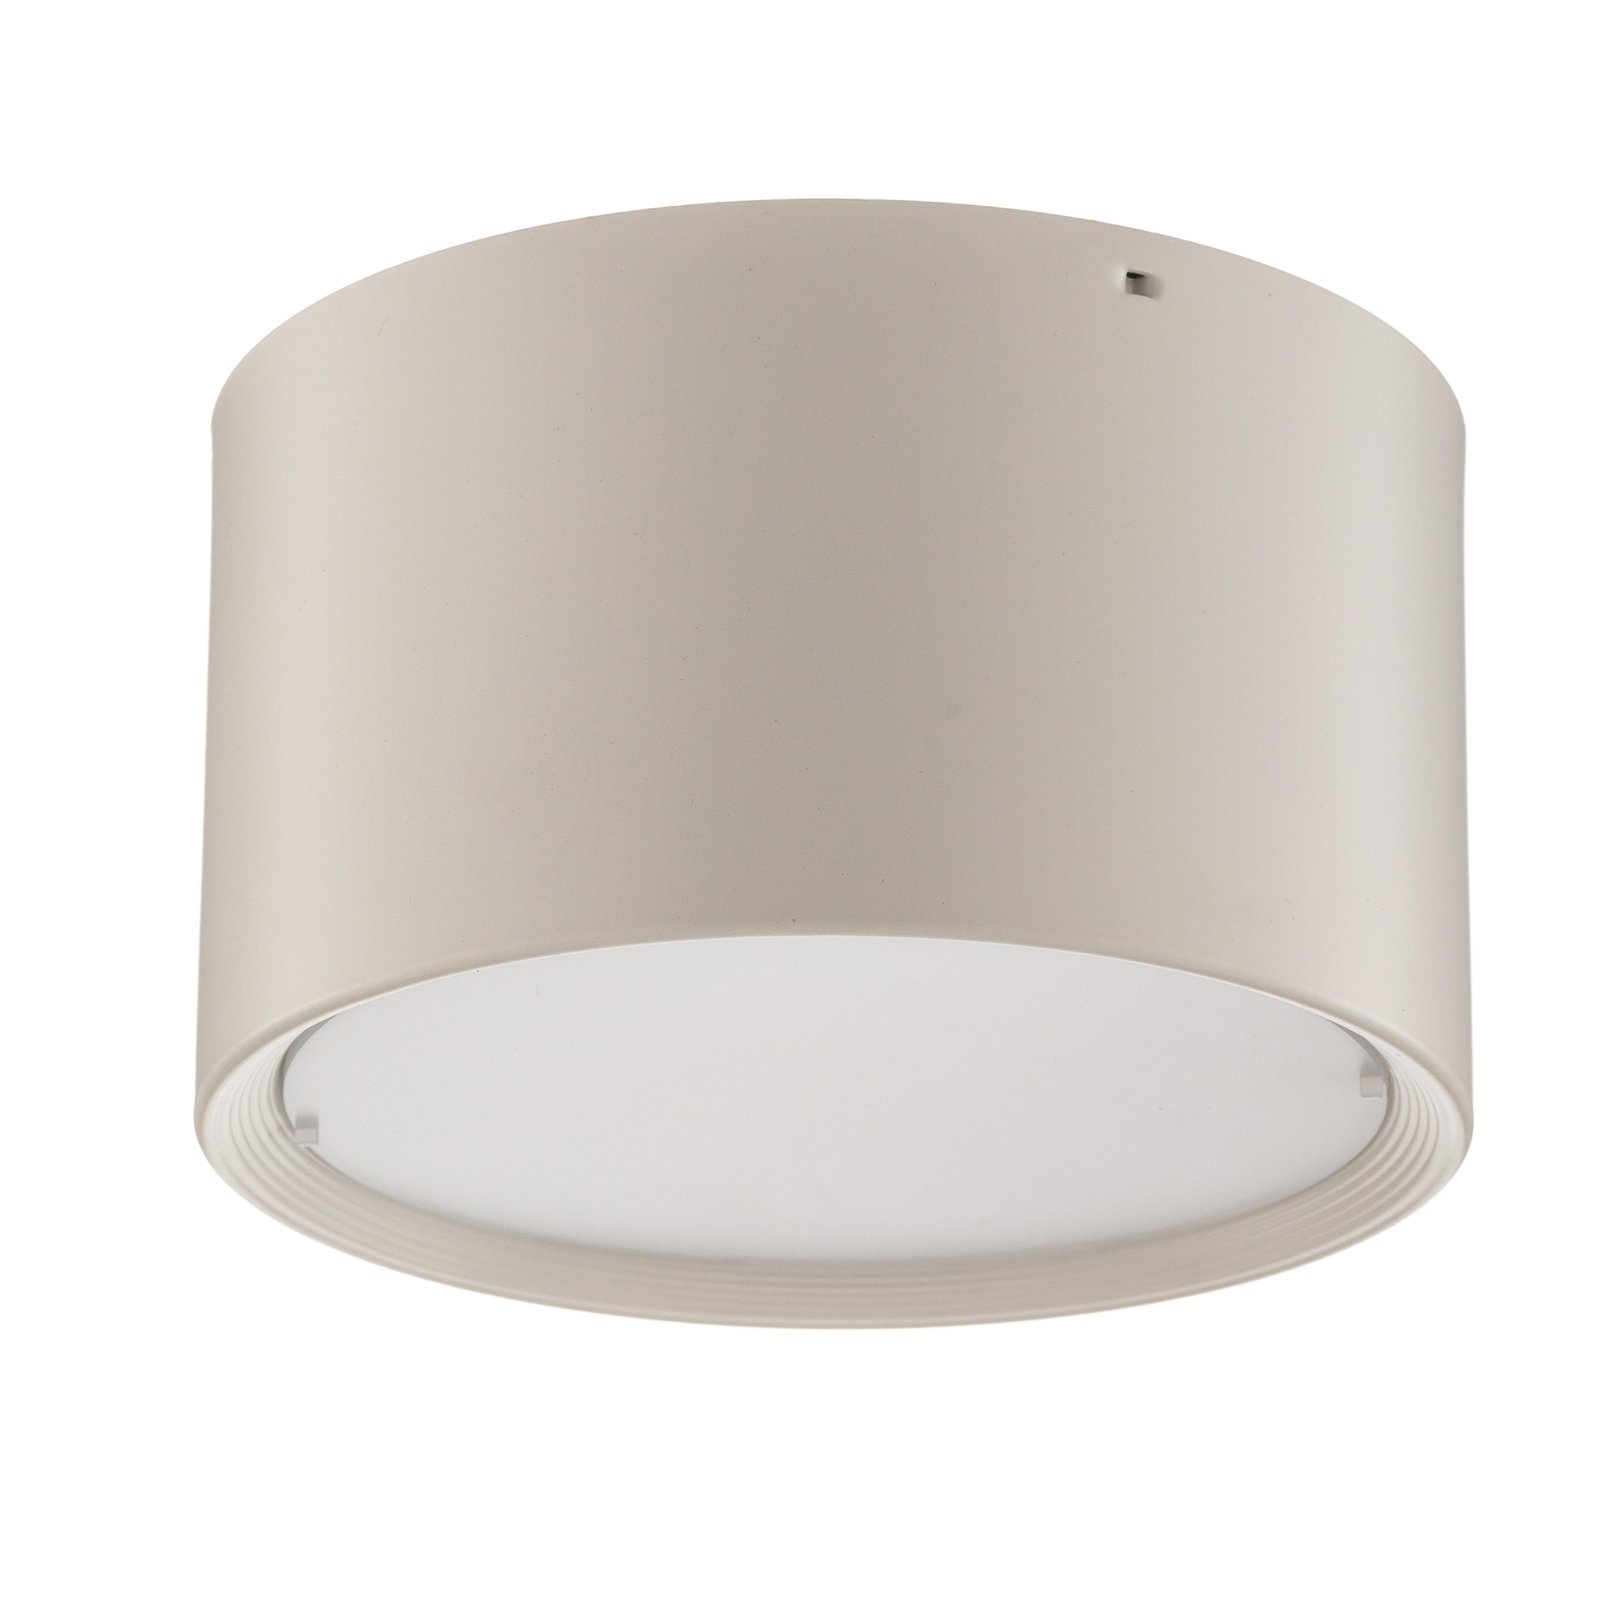 LED downlight Ita in white with diffuser, Ø 15 cm